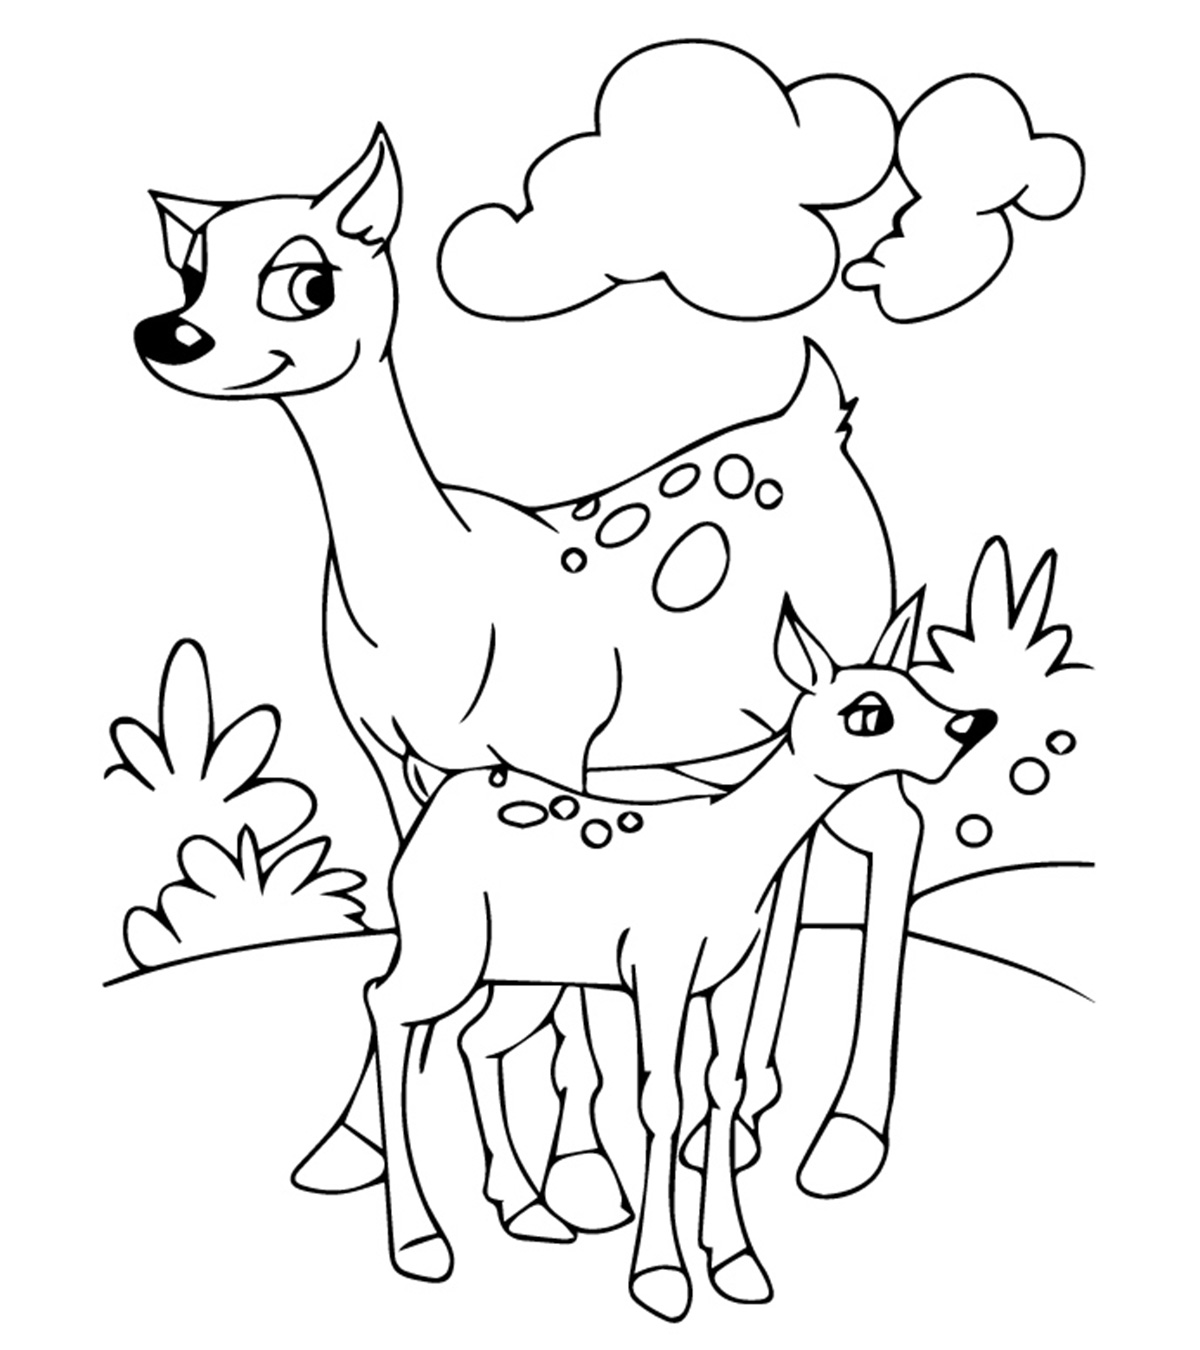 Top 25 Coloring Pages Of Animals Your Toddler Will Love_image